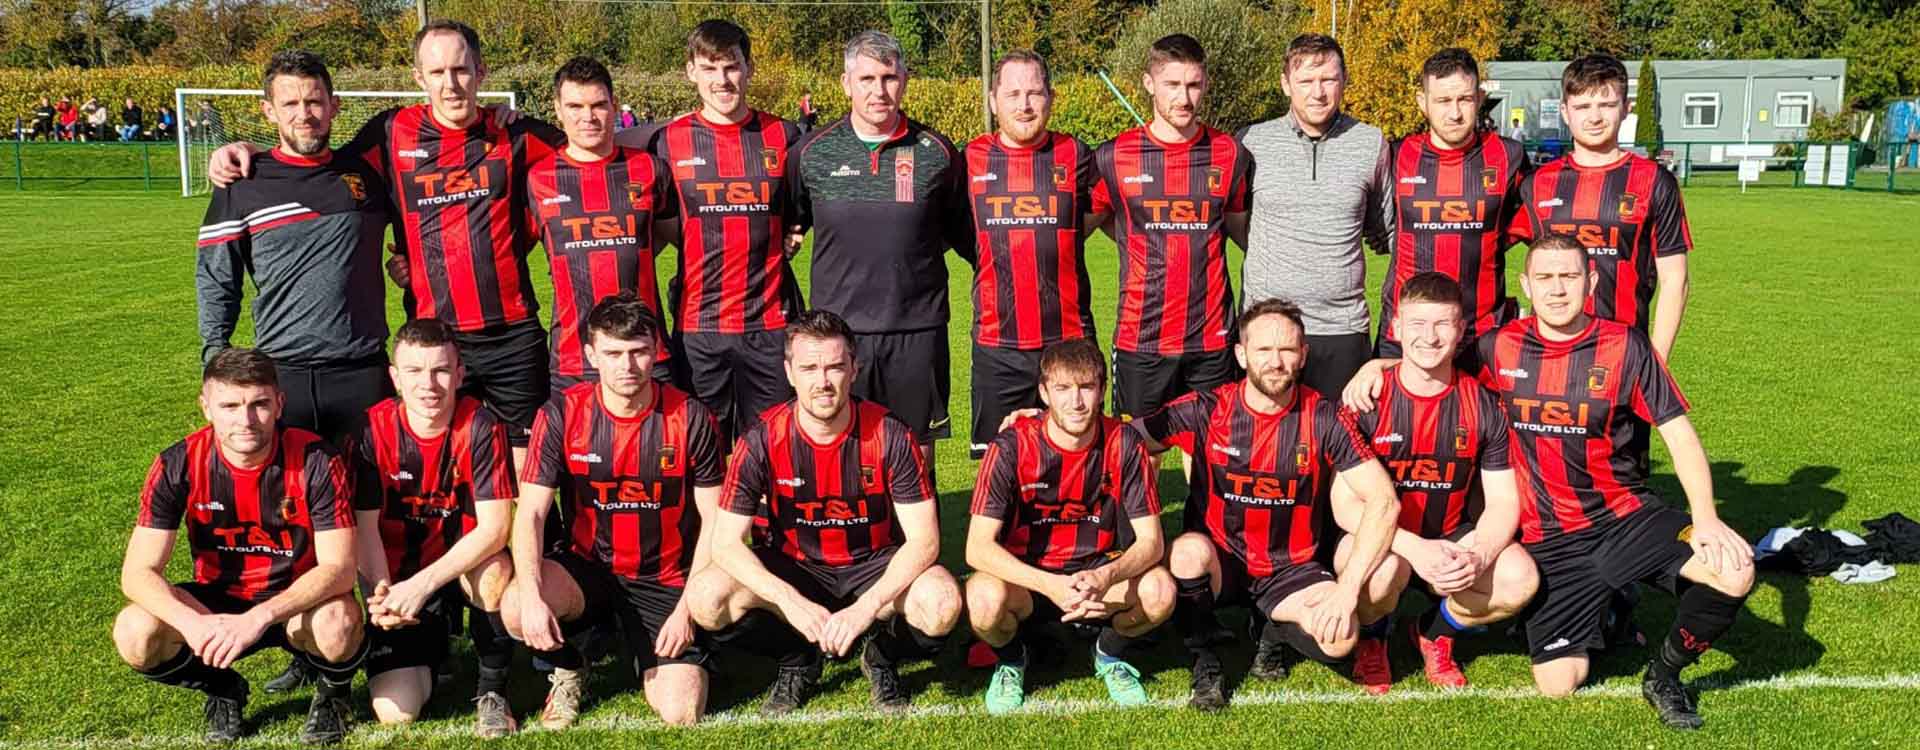 Clane United seniors advance to Lumsden Cup Final